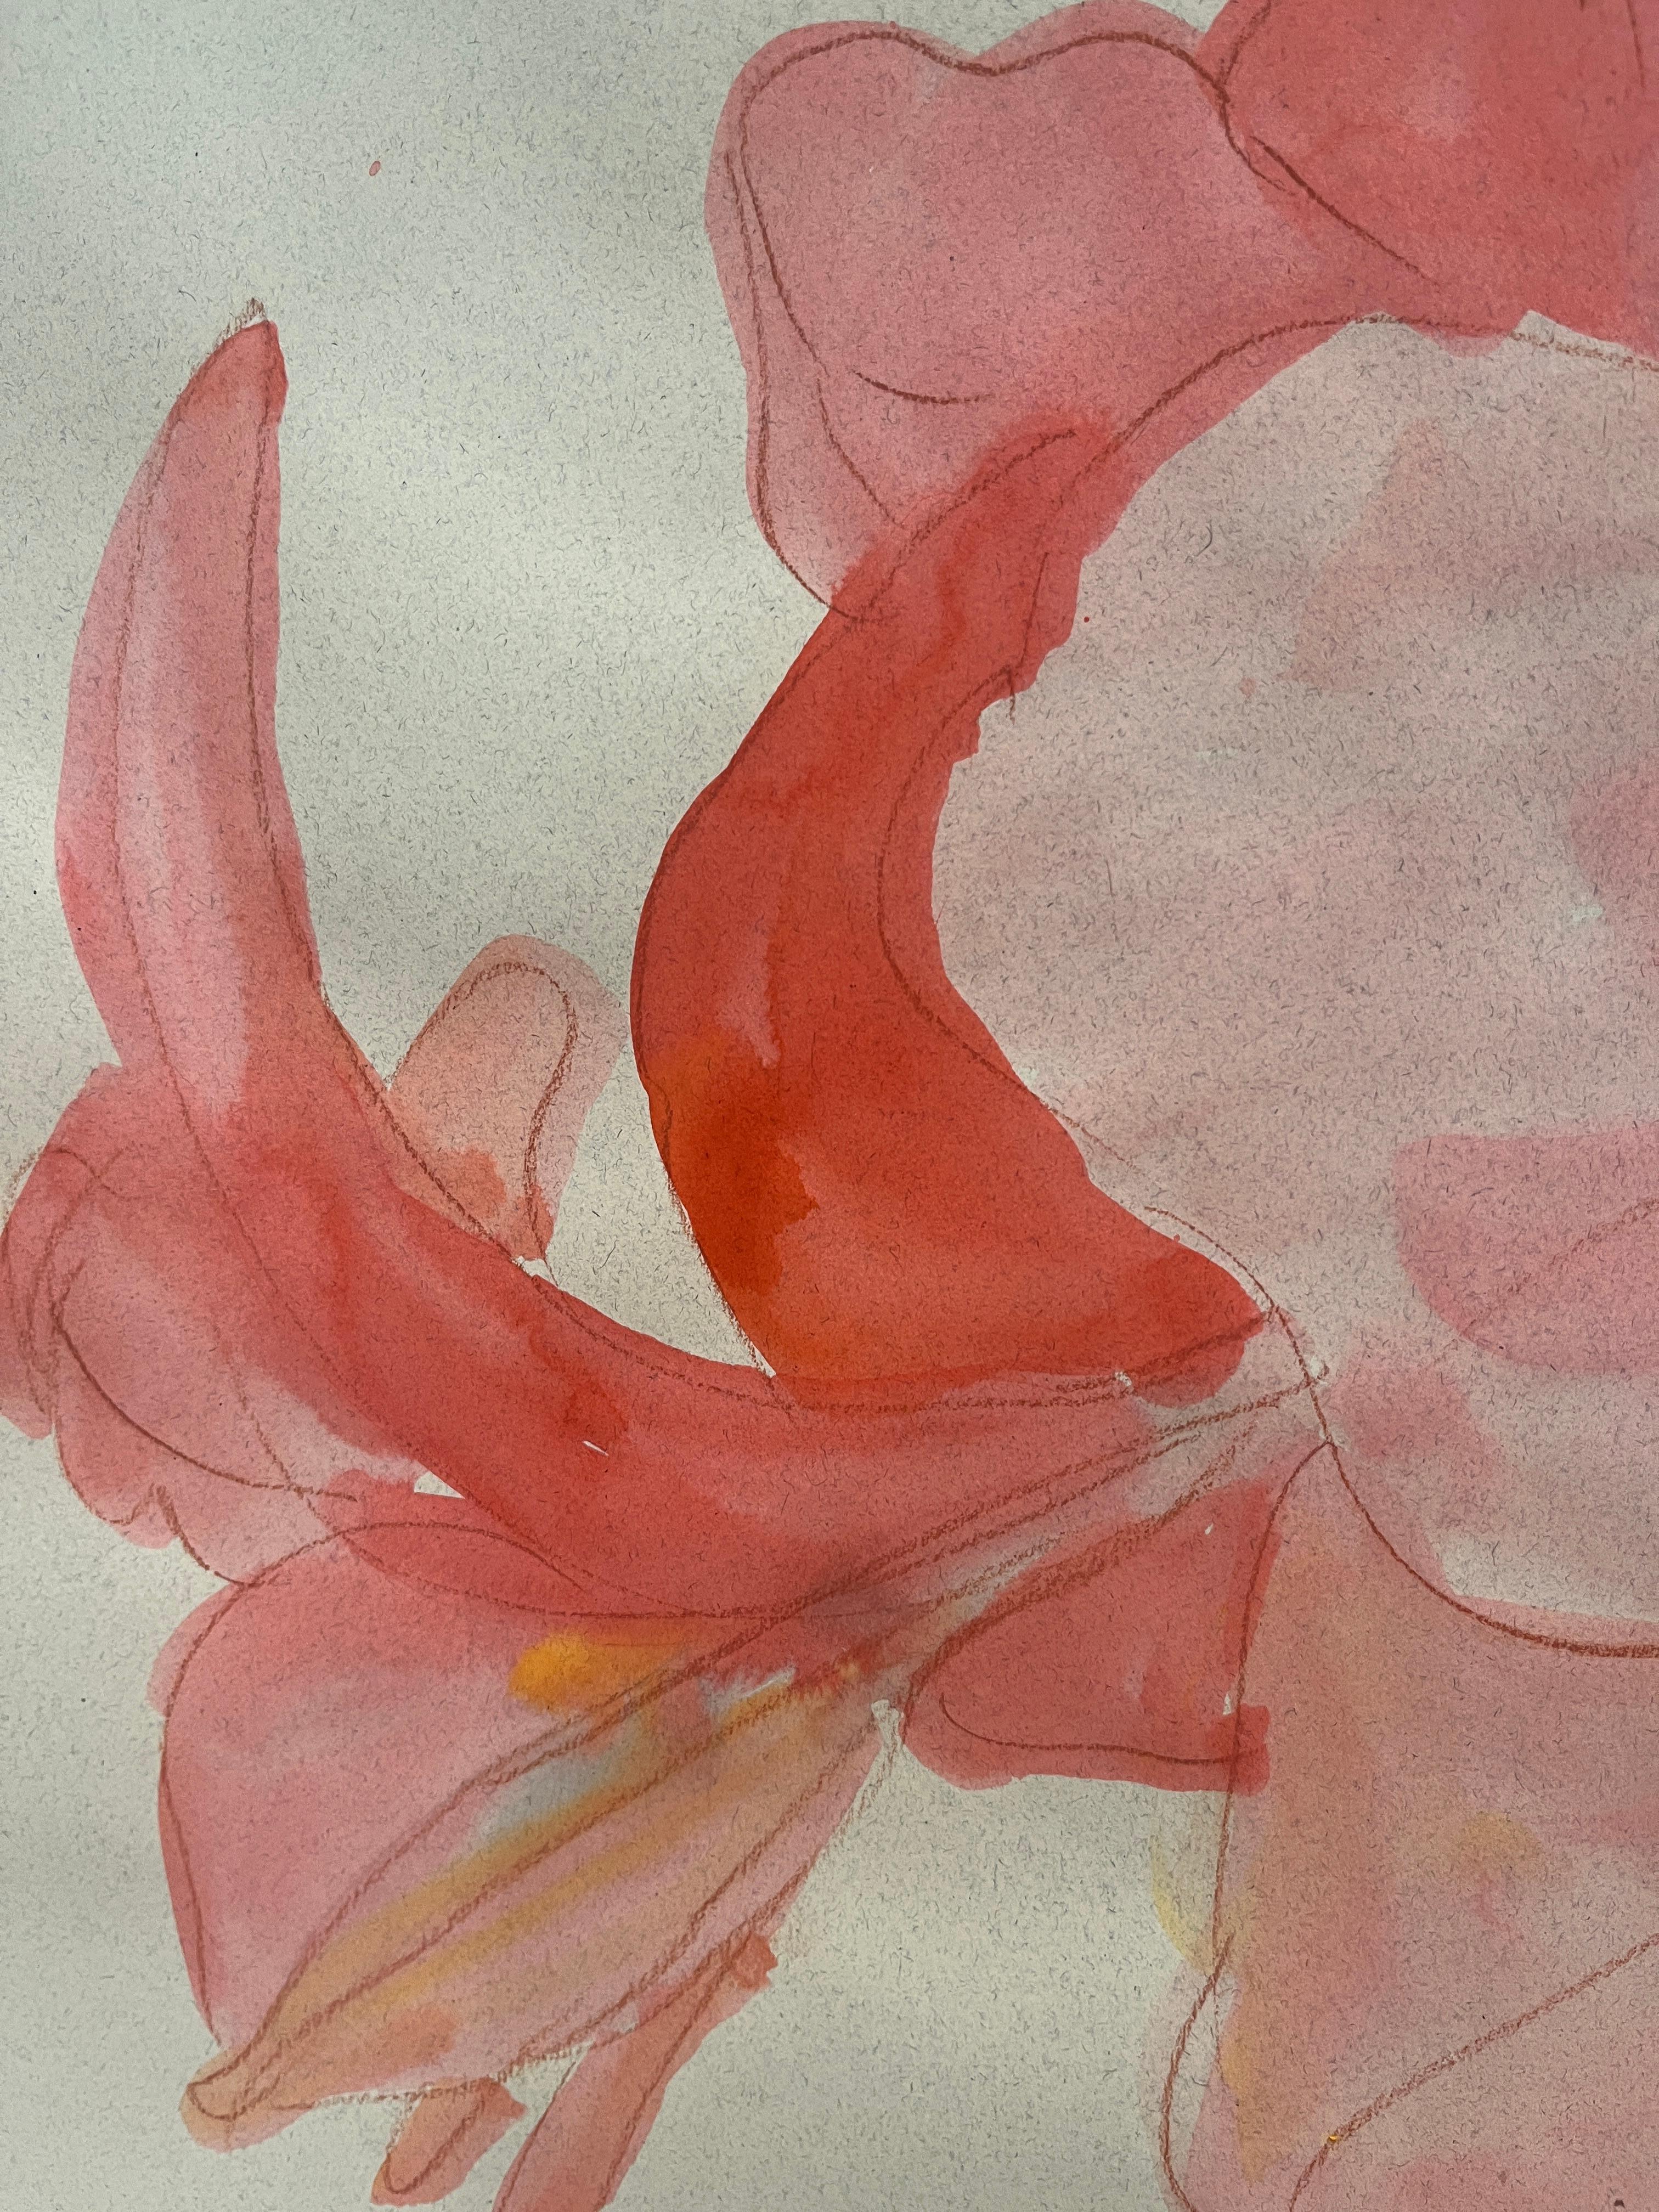 Composition Flora 2: Contemporary Still-life Drawing and Watercolors on Paper - Art by Renelio Marin